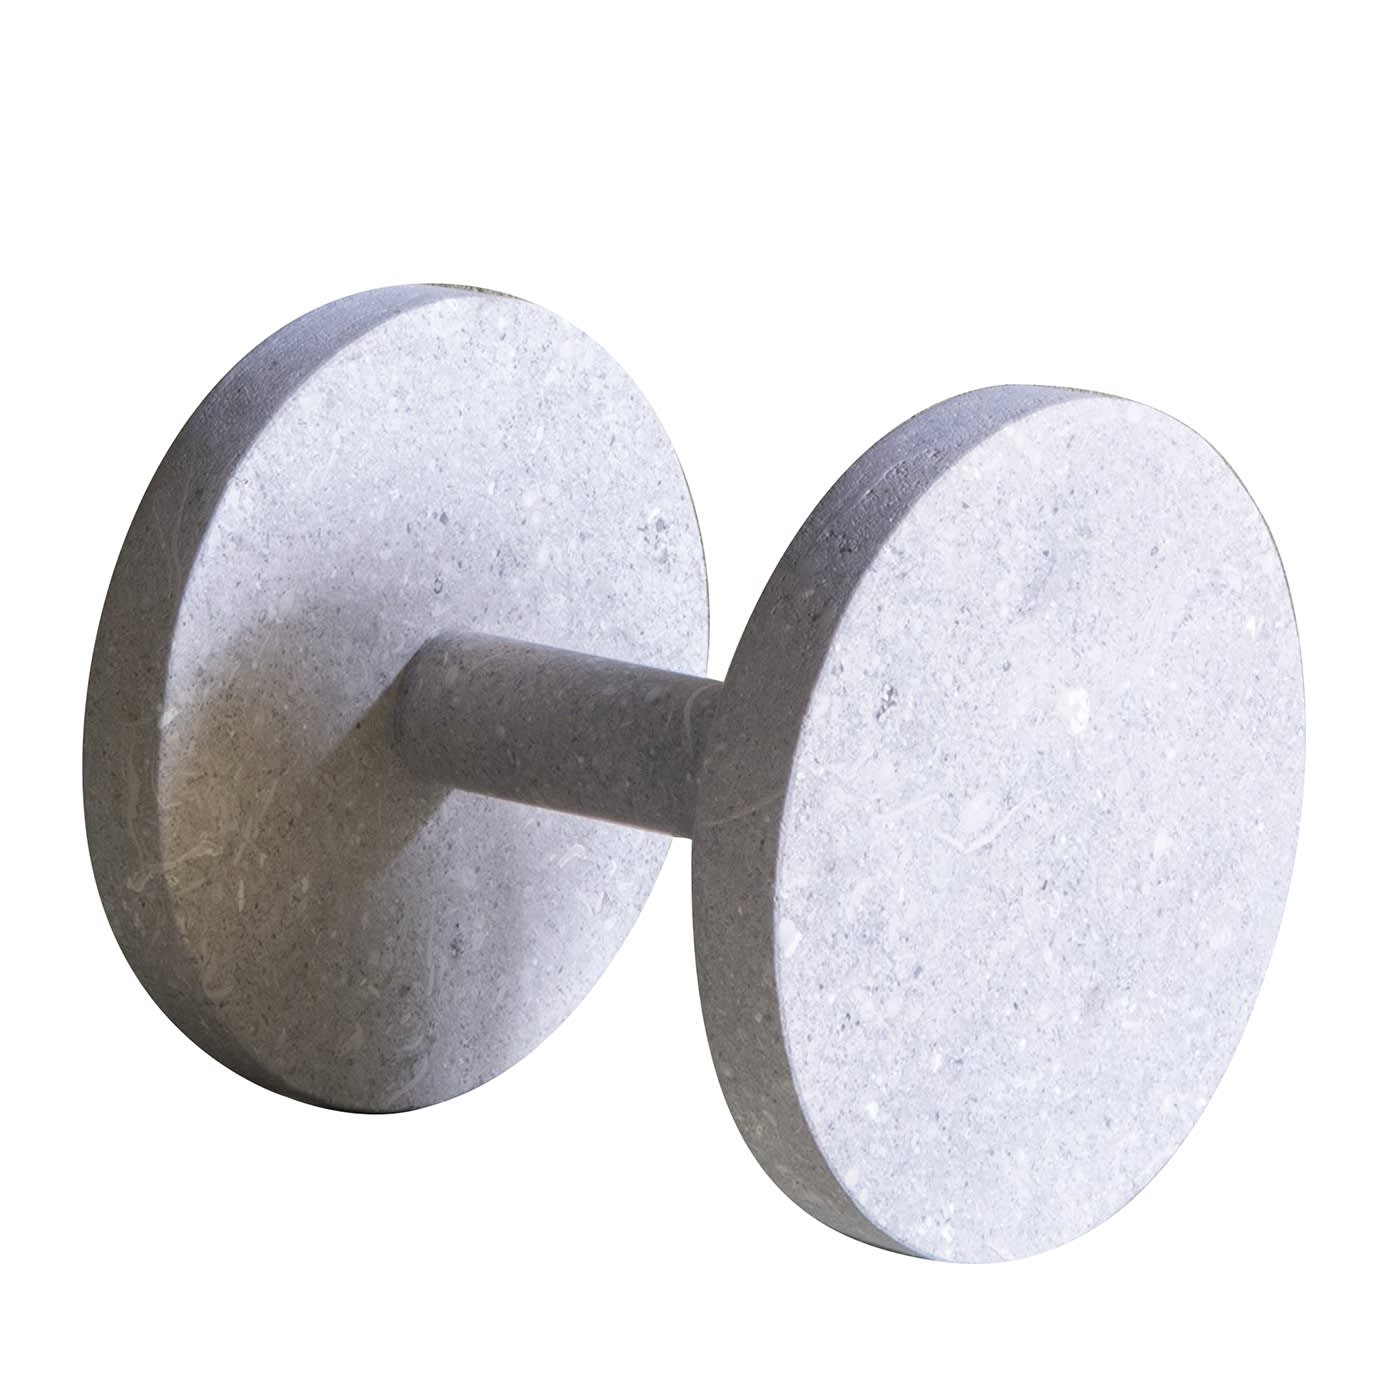 Ora Collection Set of 2 Vicenza Stone Peso Specifico Weights - MADE IN EDIT